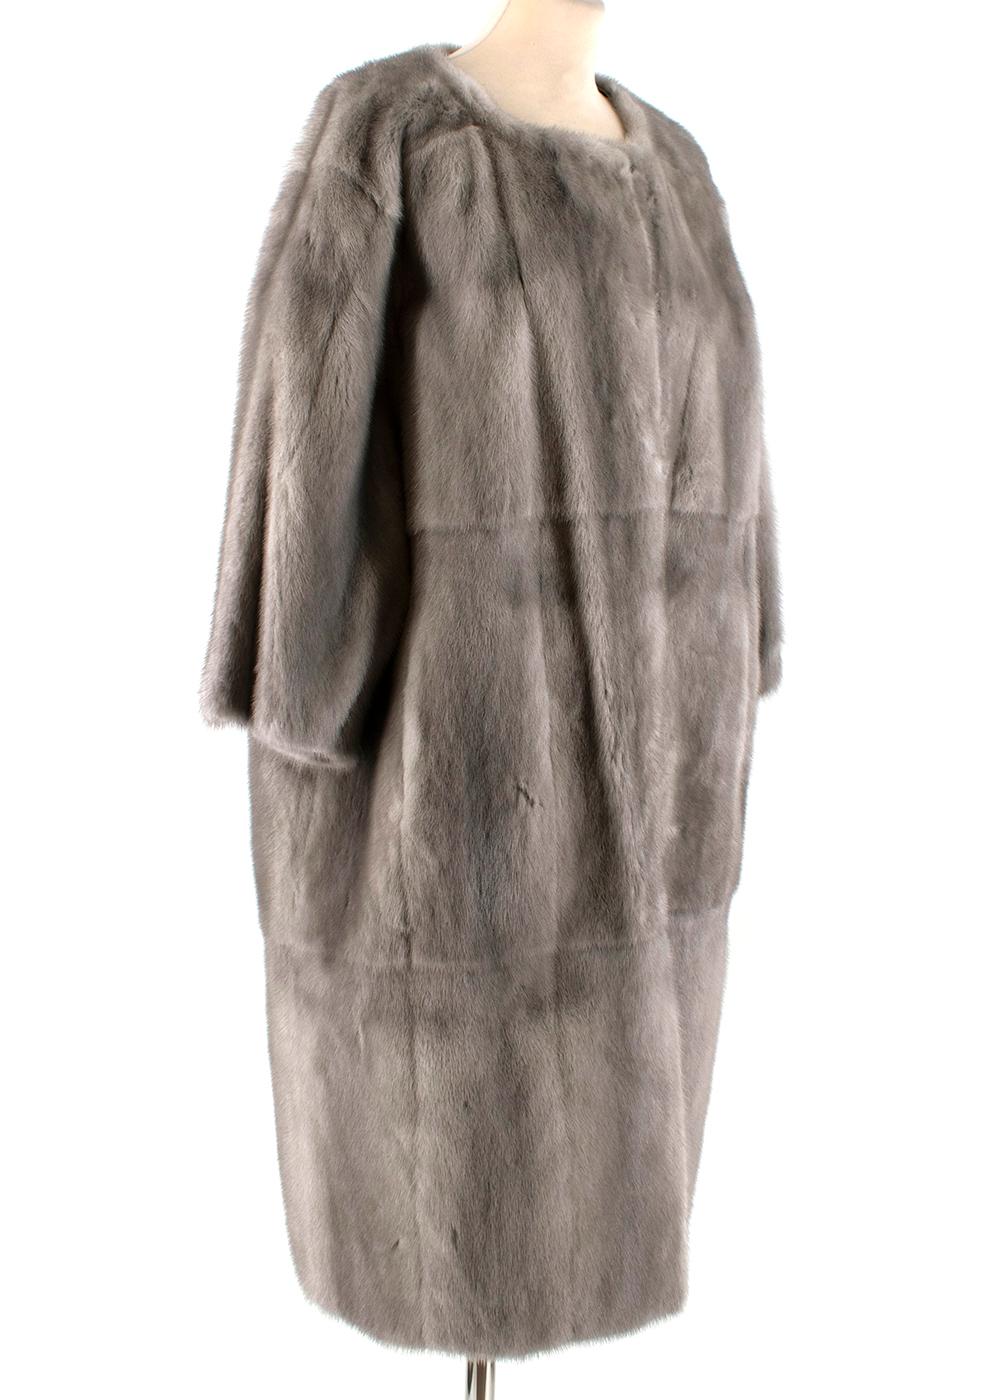 Prada Grey Mink Coat

-Luxurious soft fur texture
-Neutral medium grey hue 
-Timeless classic cut
-Round neckline 
-Hook fastening to the front 
-pockets to the front  
-Elegant, easy to style coat
-One of those pieces that if treated kindly will